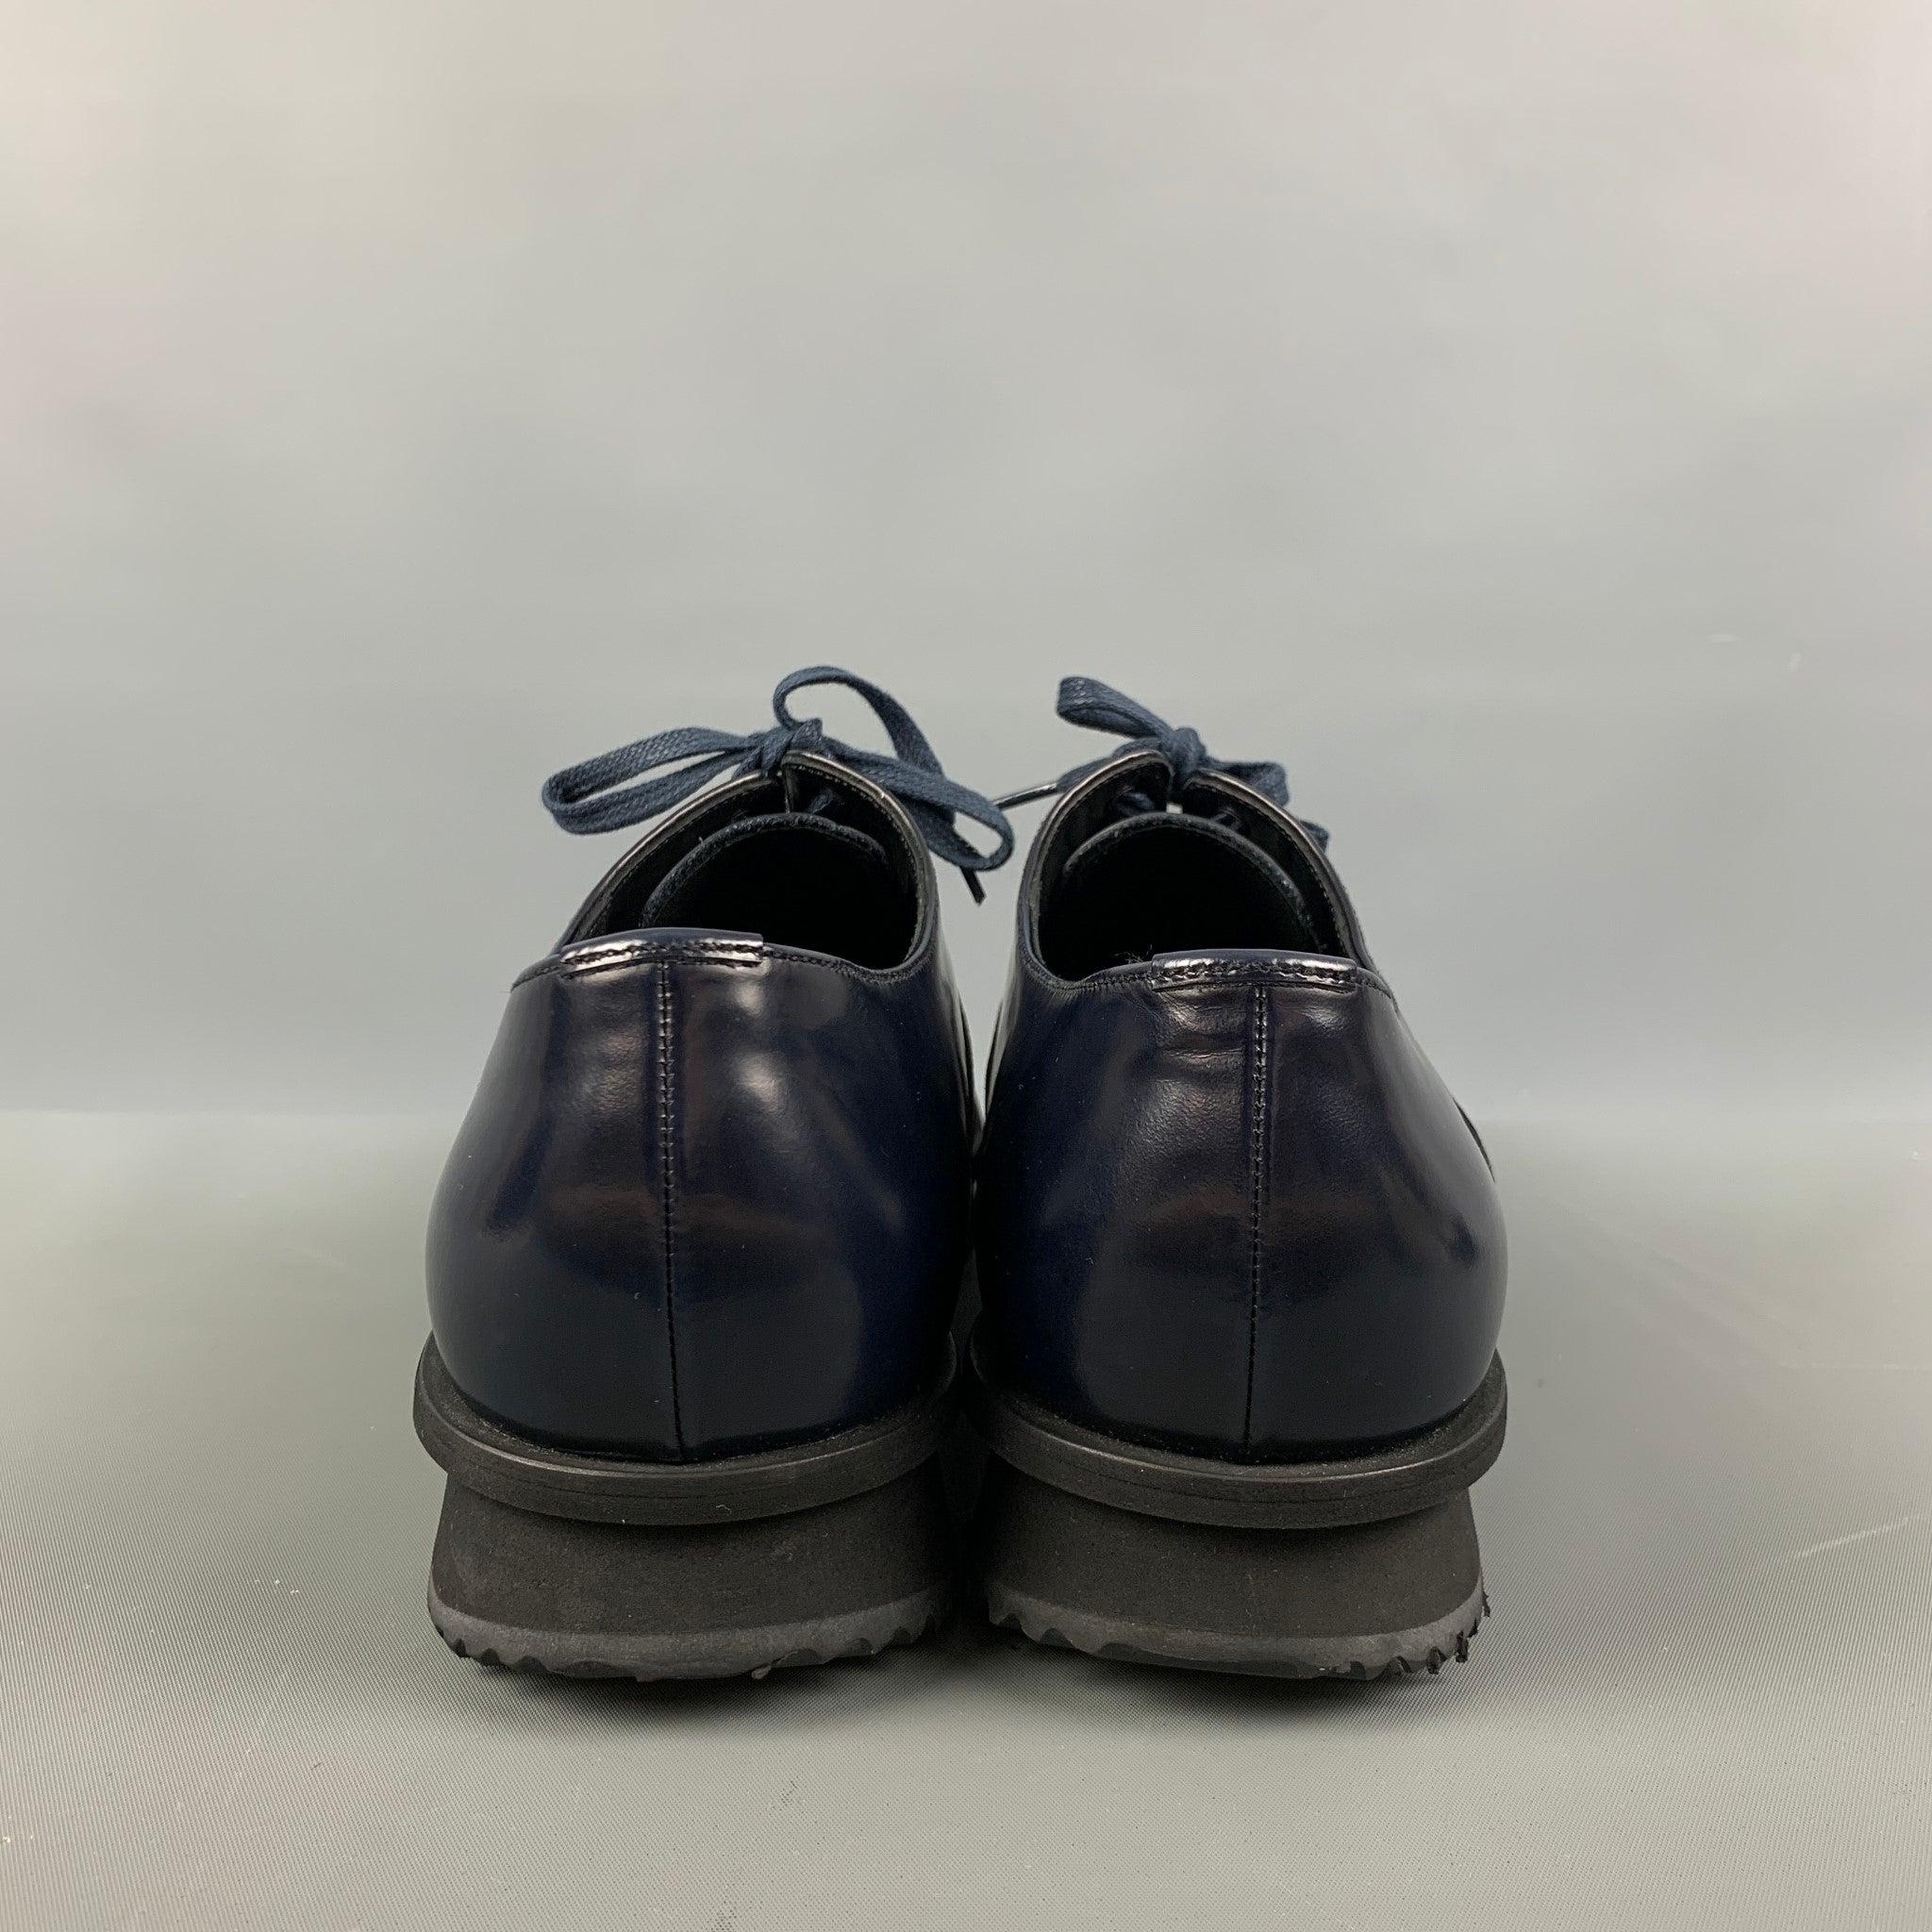 PRADA Size 8.5 Navy Leather Lace Up Shoes In Excellent Condition For Sale In San Francisco, CA